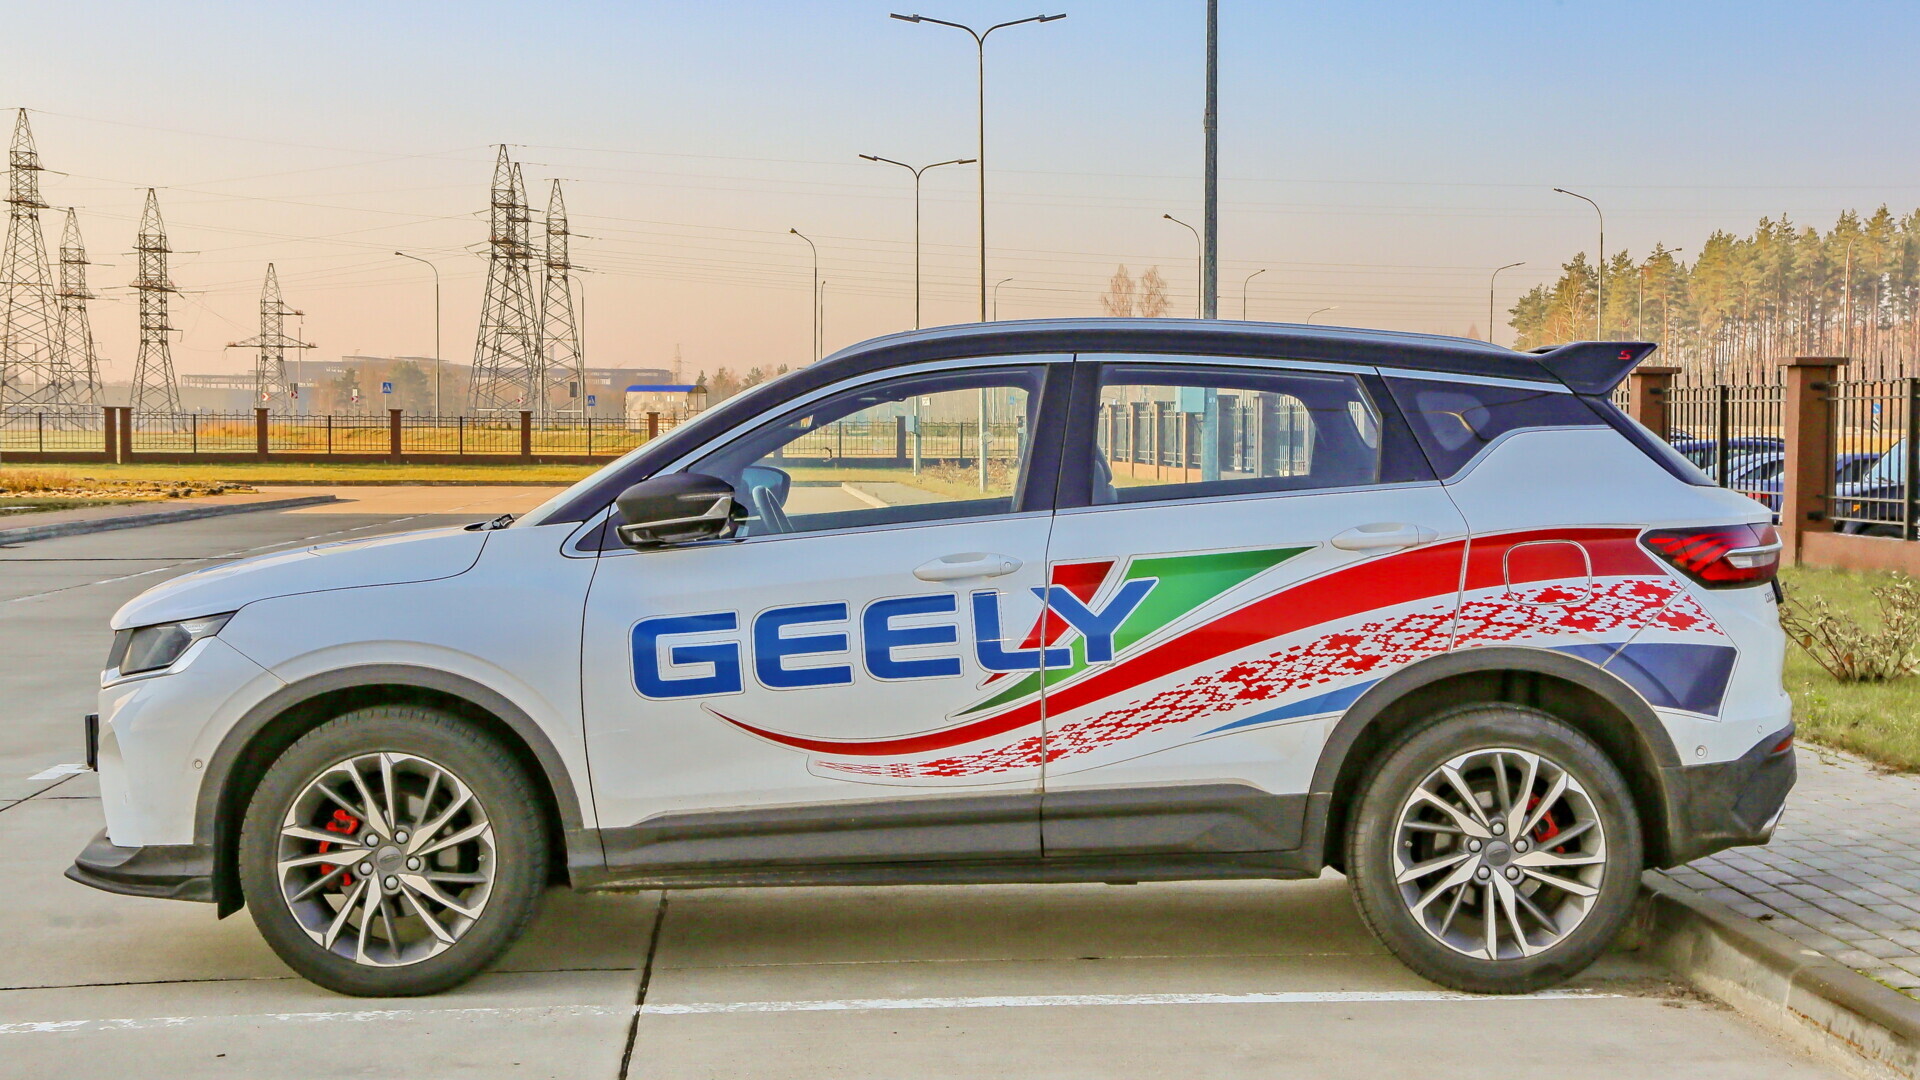 After Lukashenka's intervention, prices for Geely cars decreased by 15% - Politics, news, Republic of Belarus, Alexander Lukashenko, Geely, Prices, Economy